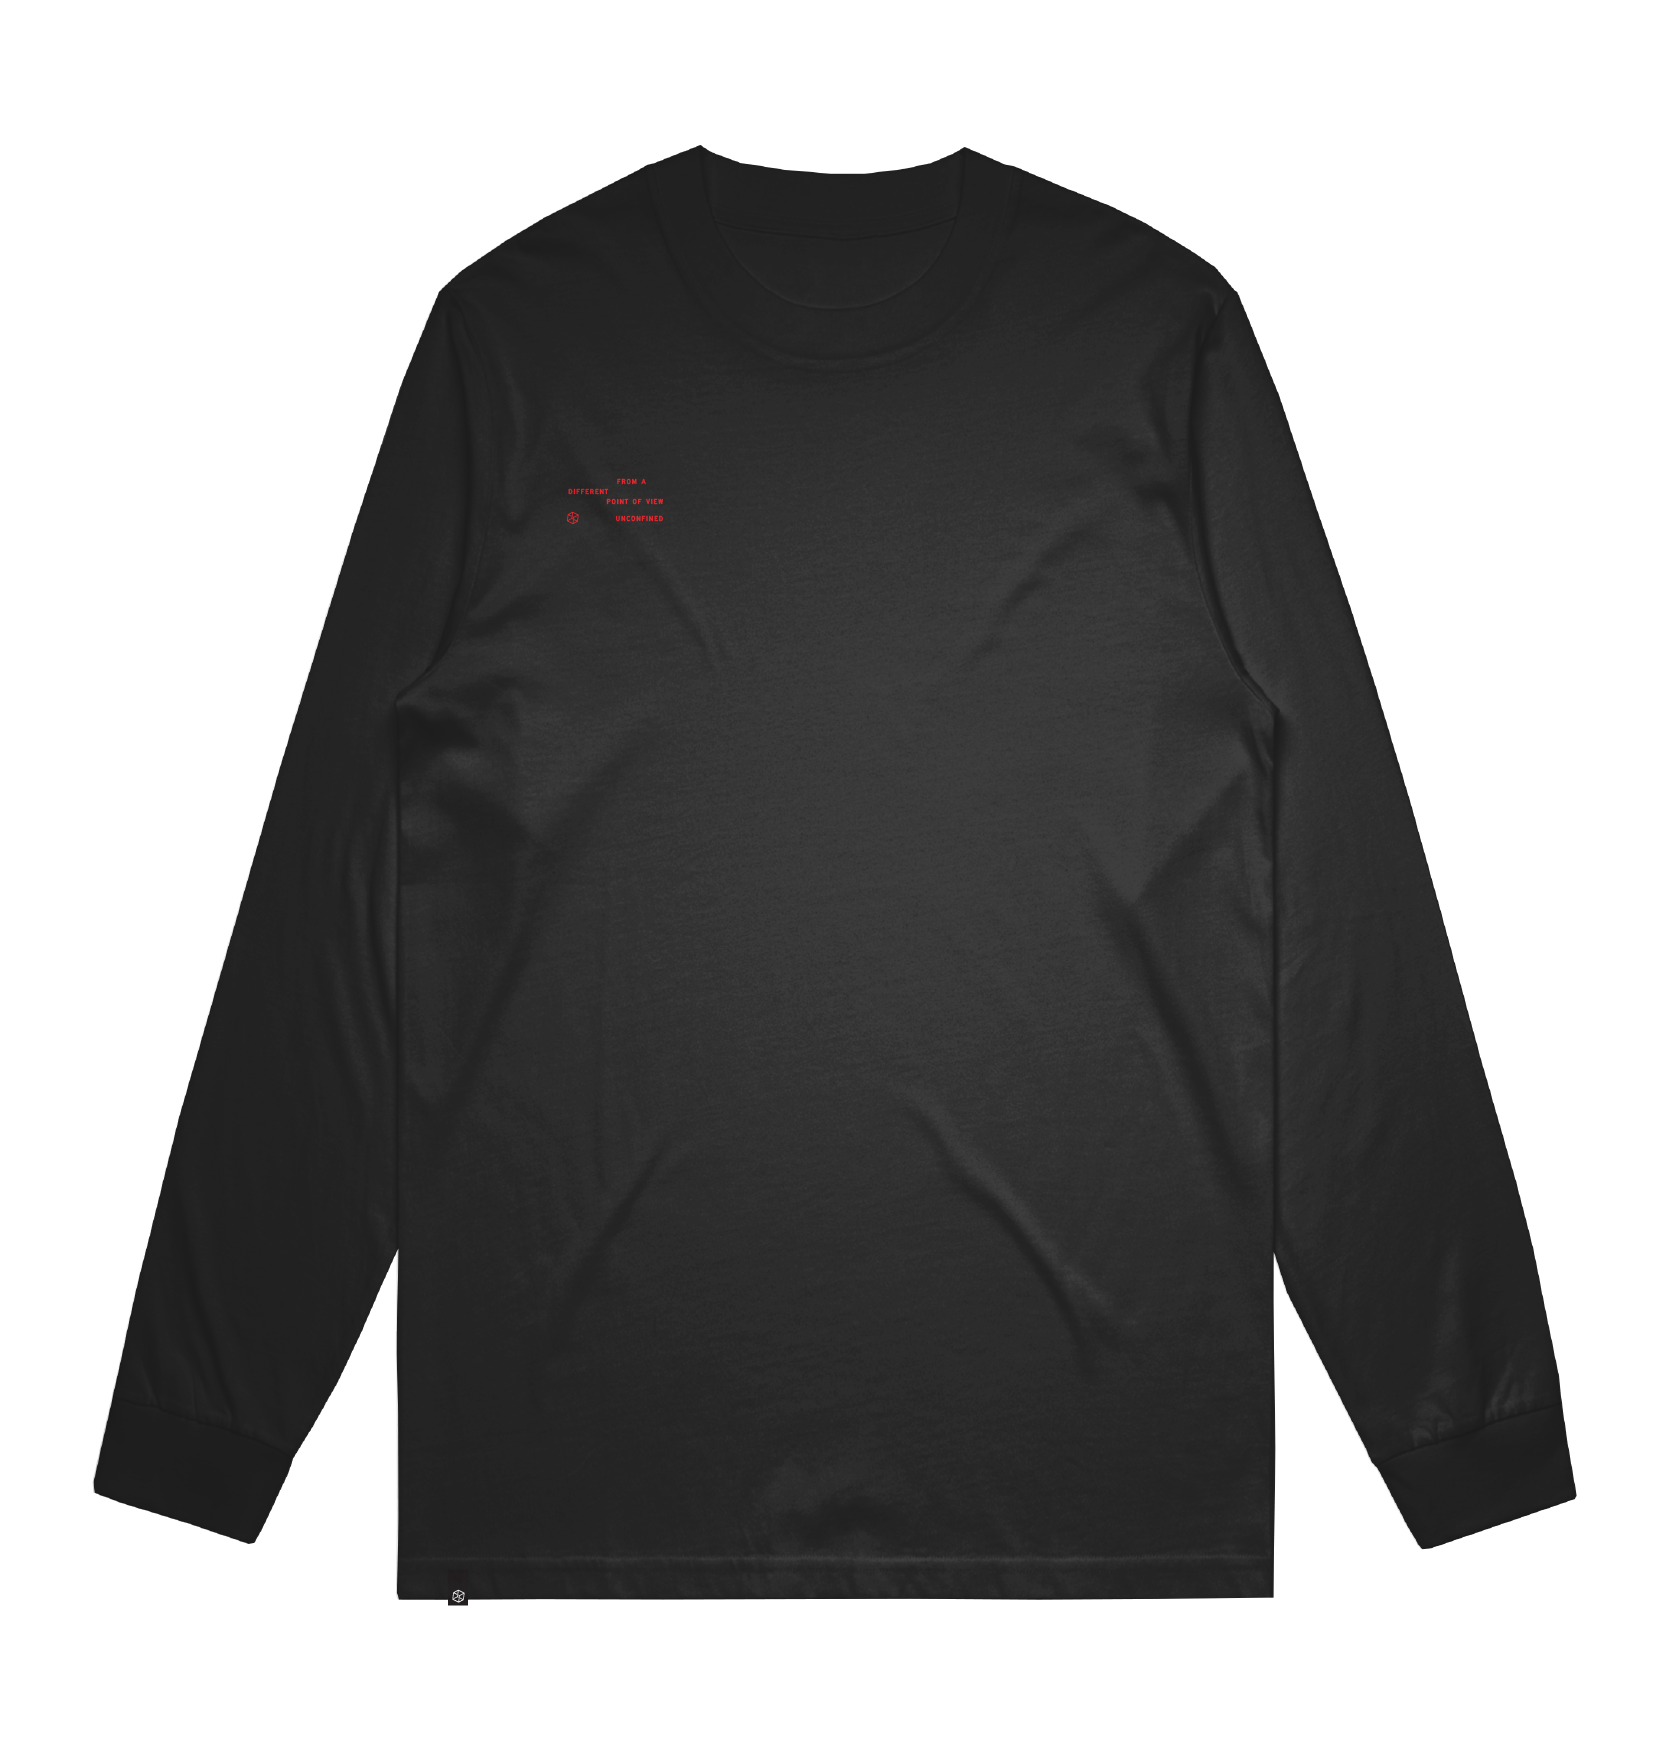 Deals with the Devil Long Sleeve T-Shirt Front Back